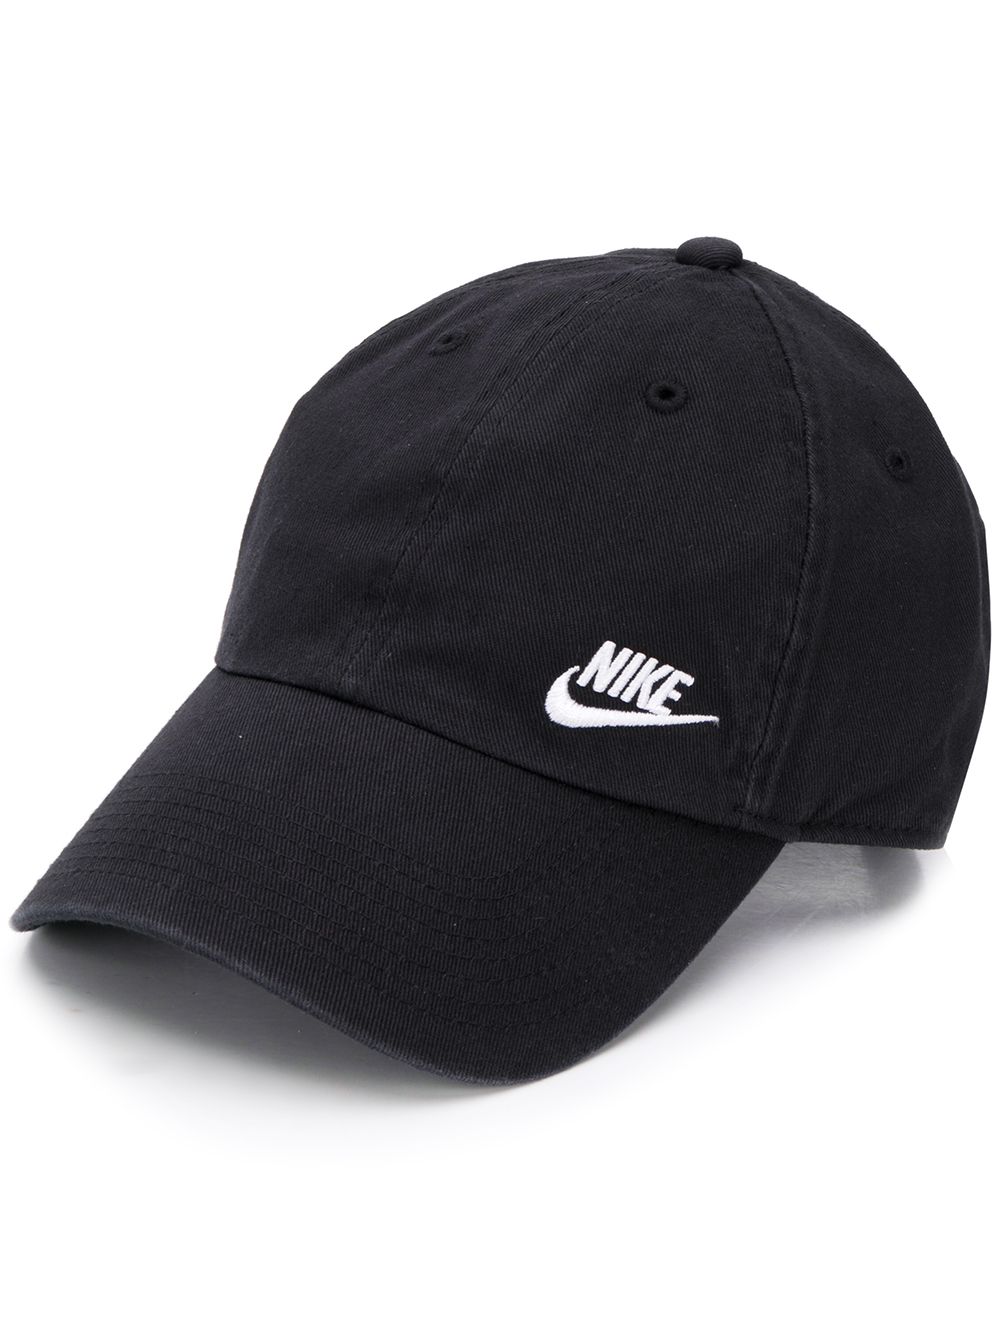 NIKE EMBROIDERED LOGO CAP